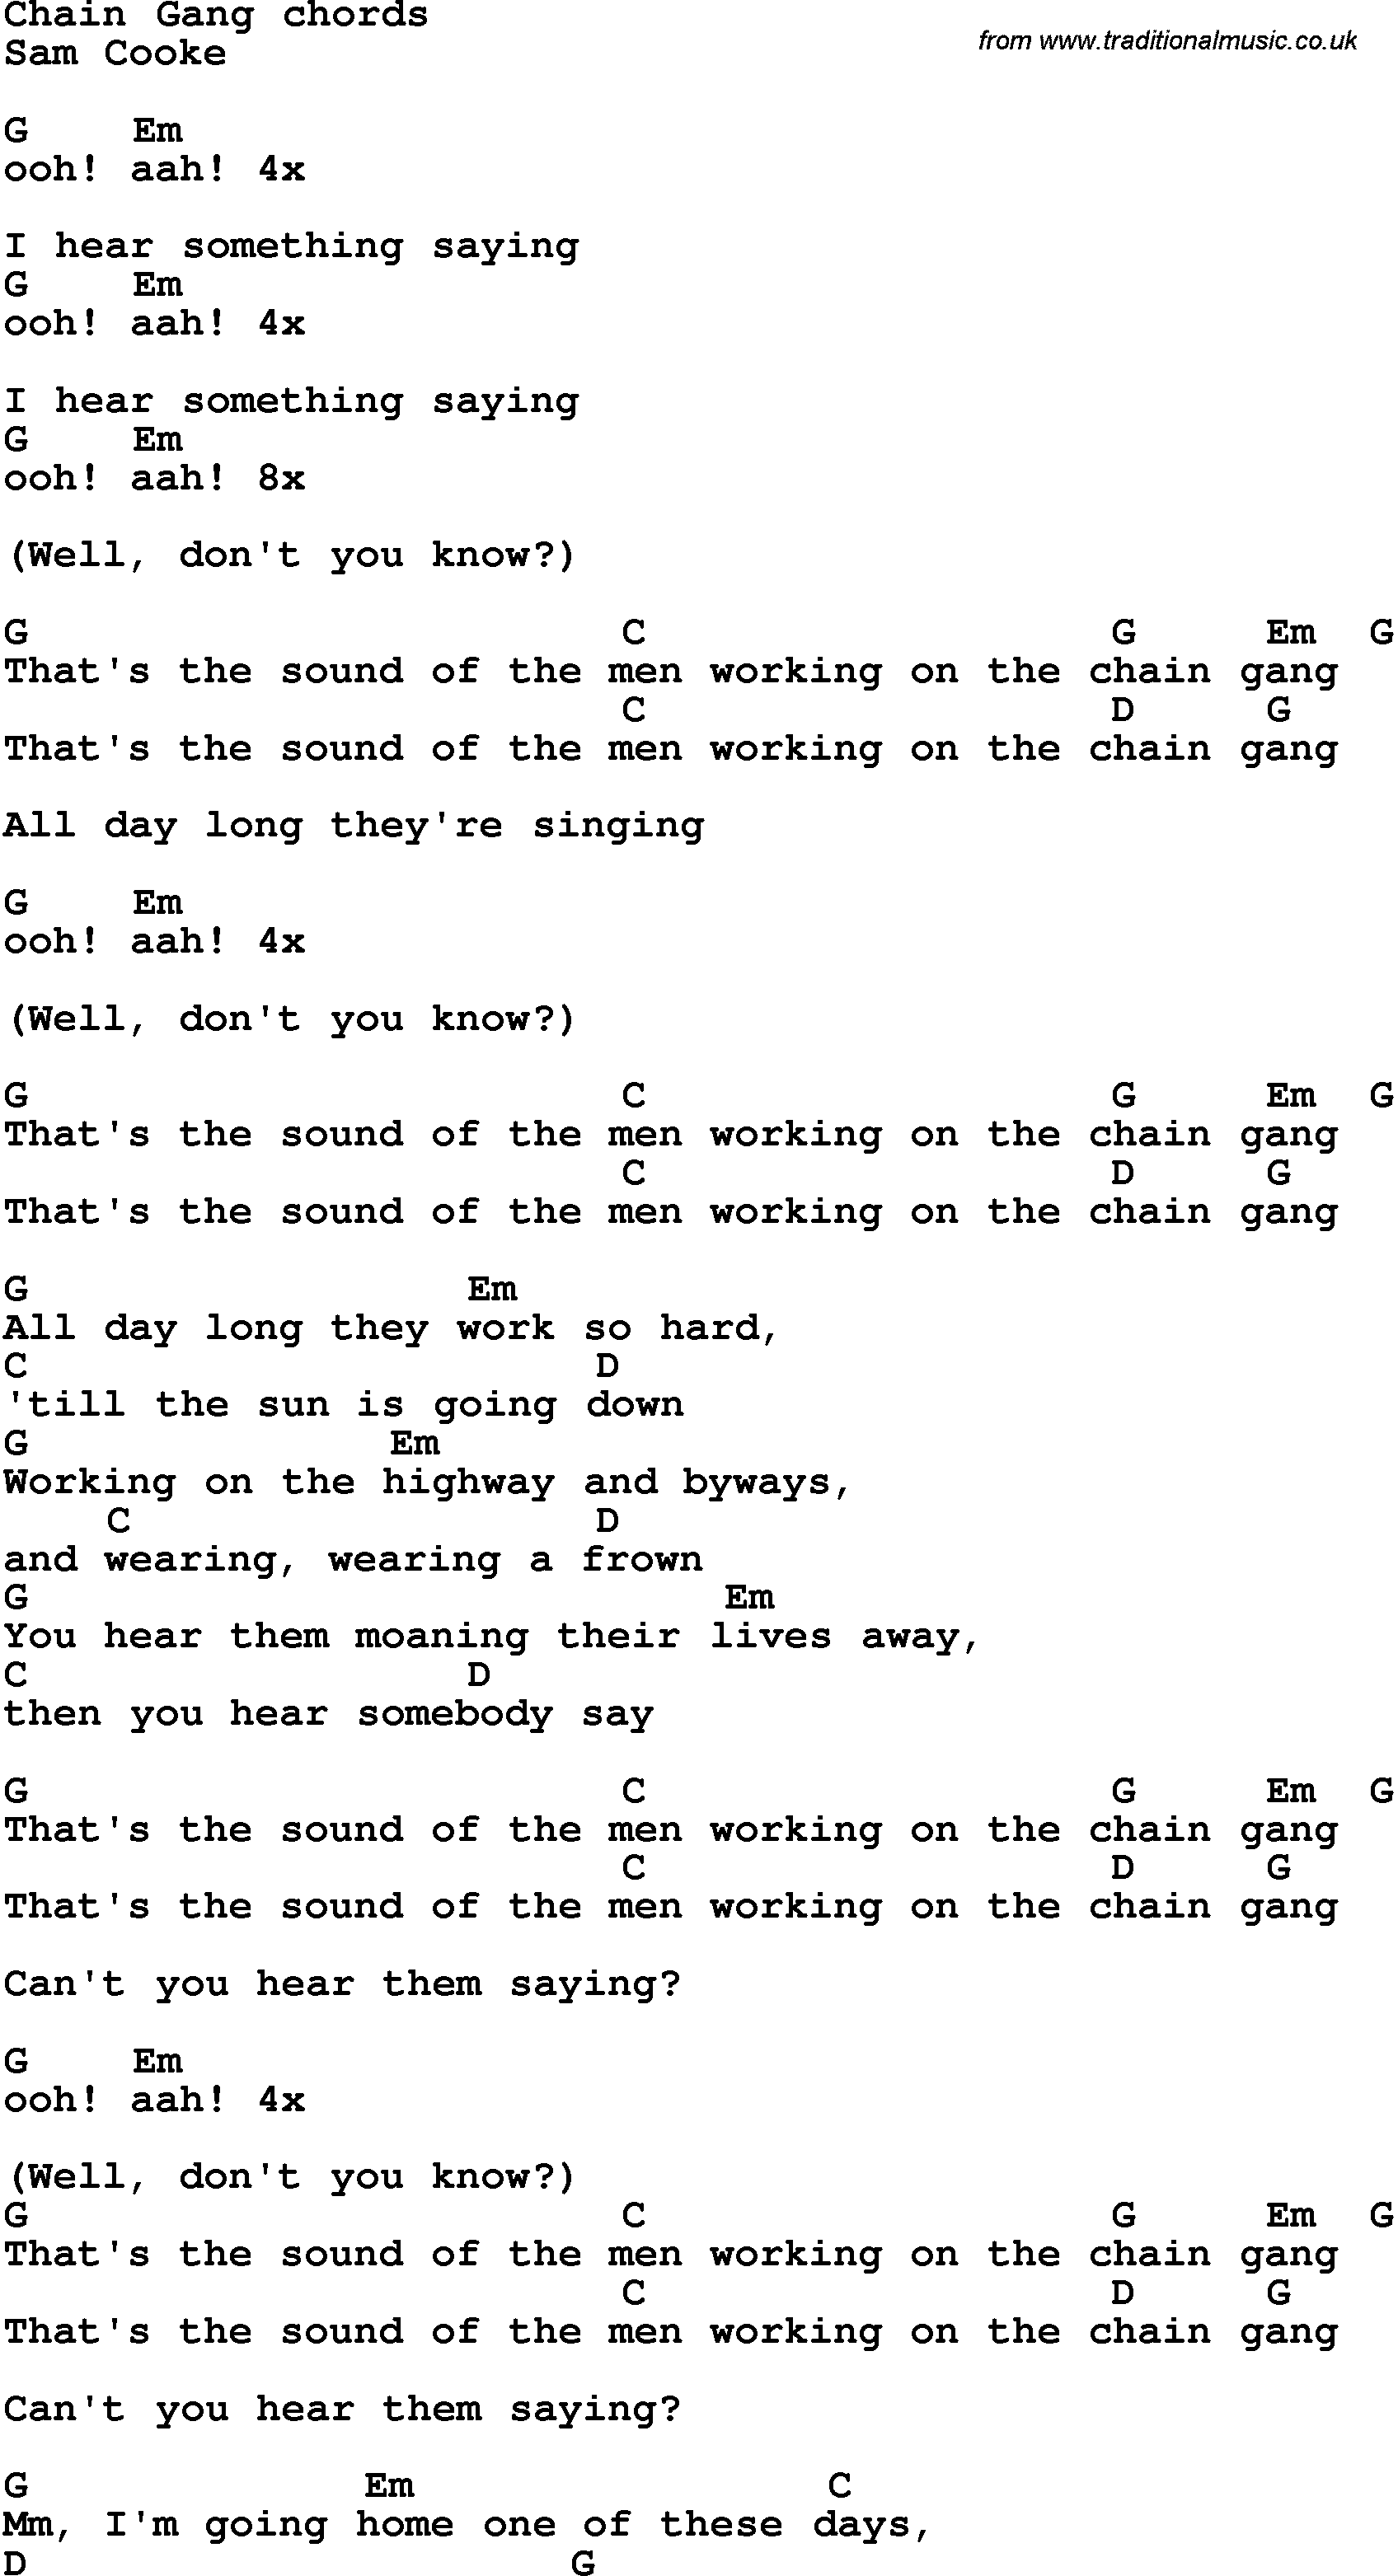 Song Lyrics with guitar chords for Chain Gang